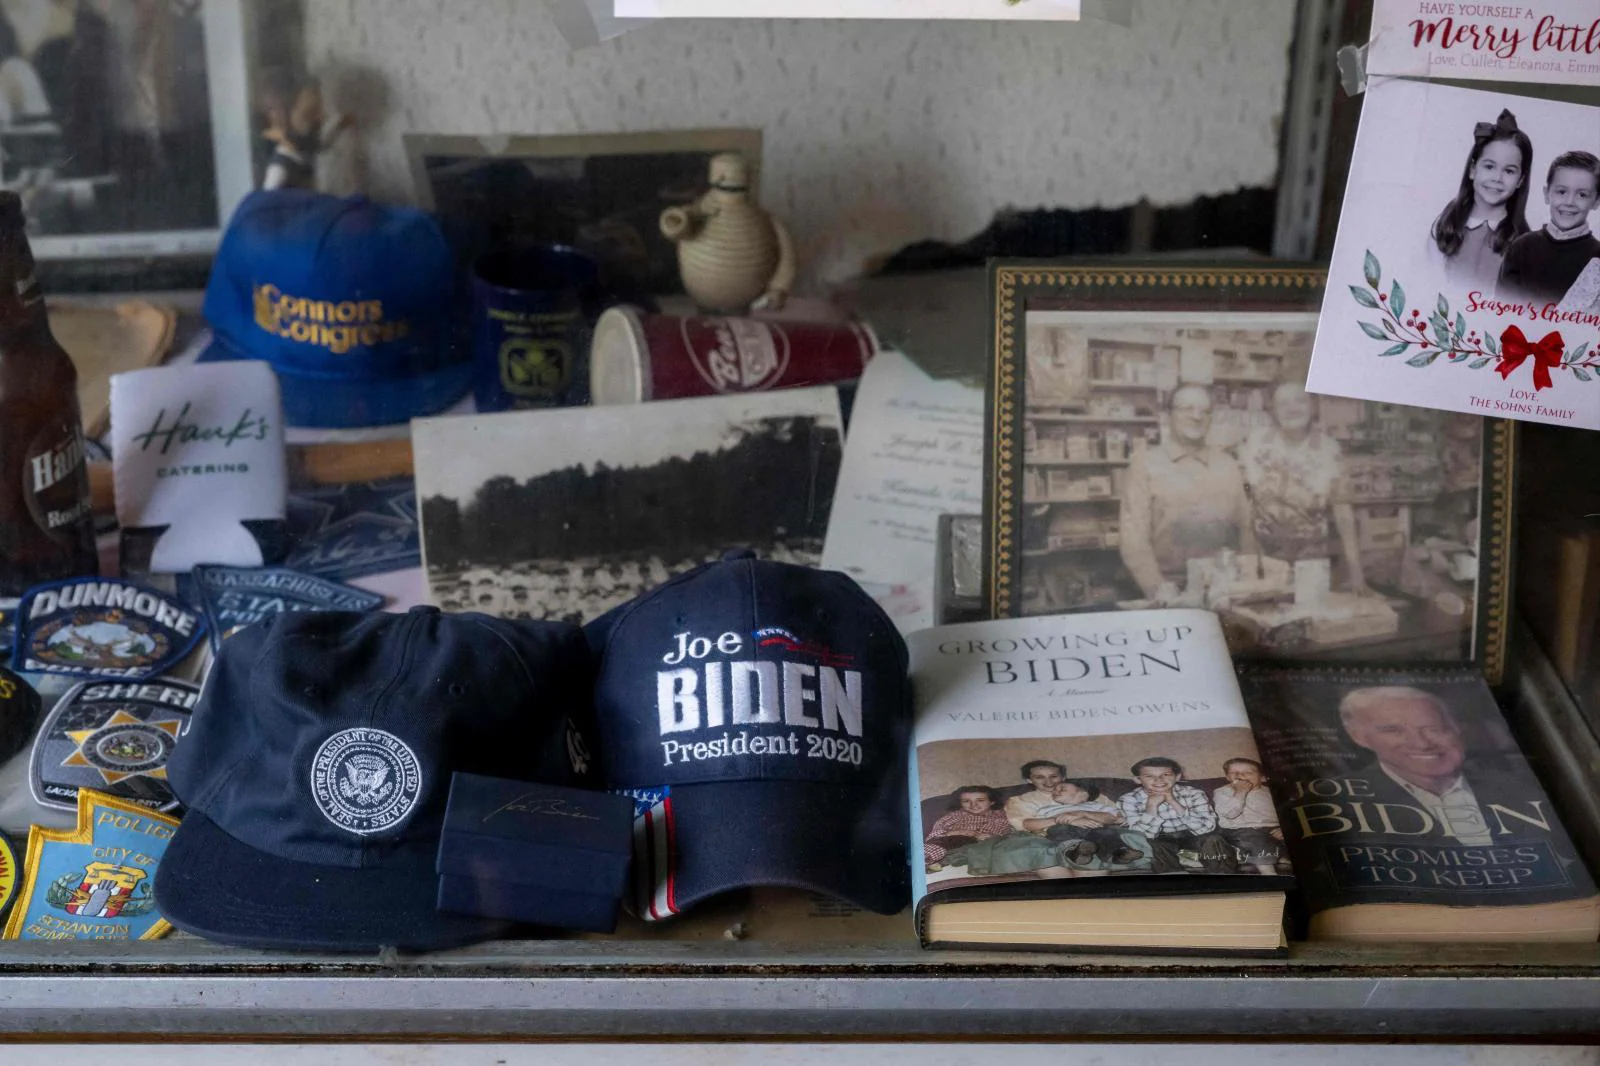 A store in Scranton, Biden's hometown, has decorated its windows with memorabilia of the candidate to celebrate this July 4th.